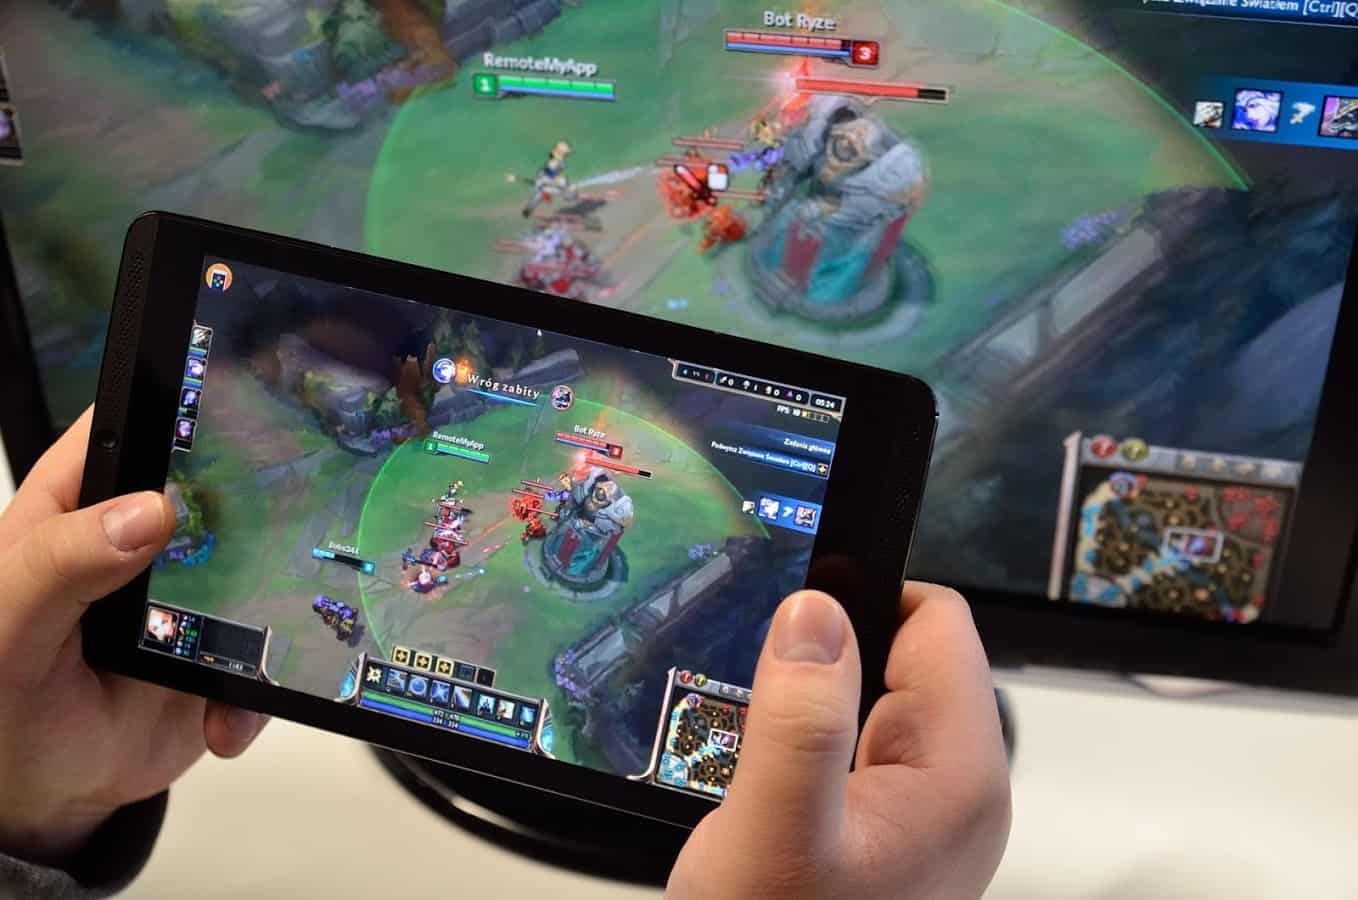 Guide & Video: How to Play PC games on Android